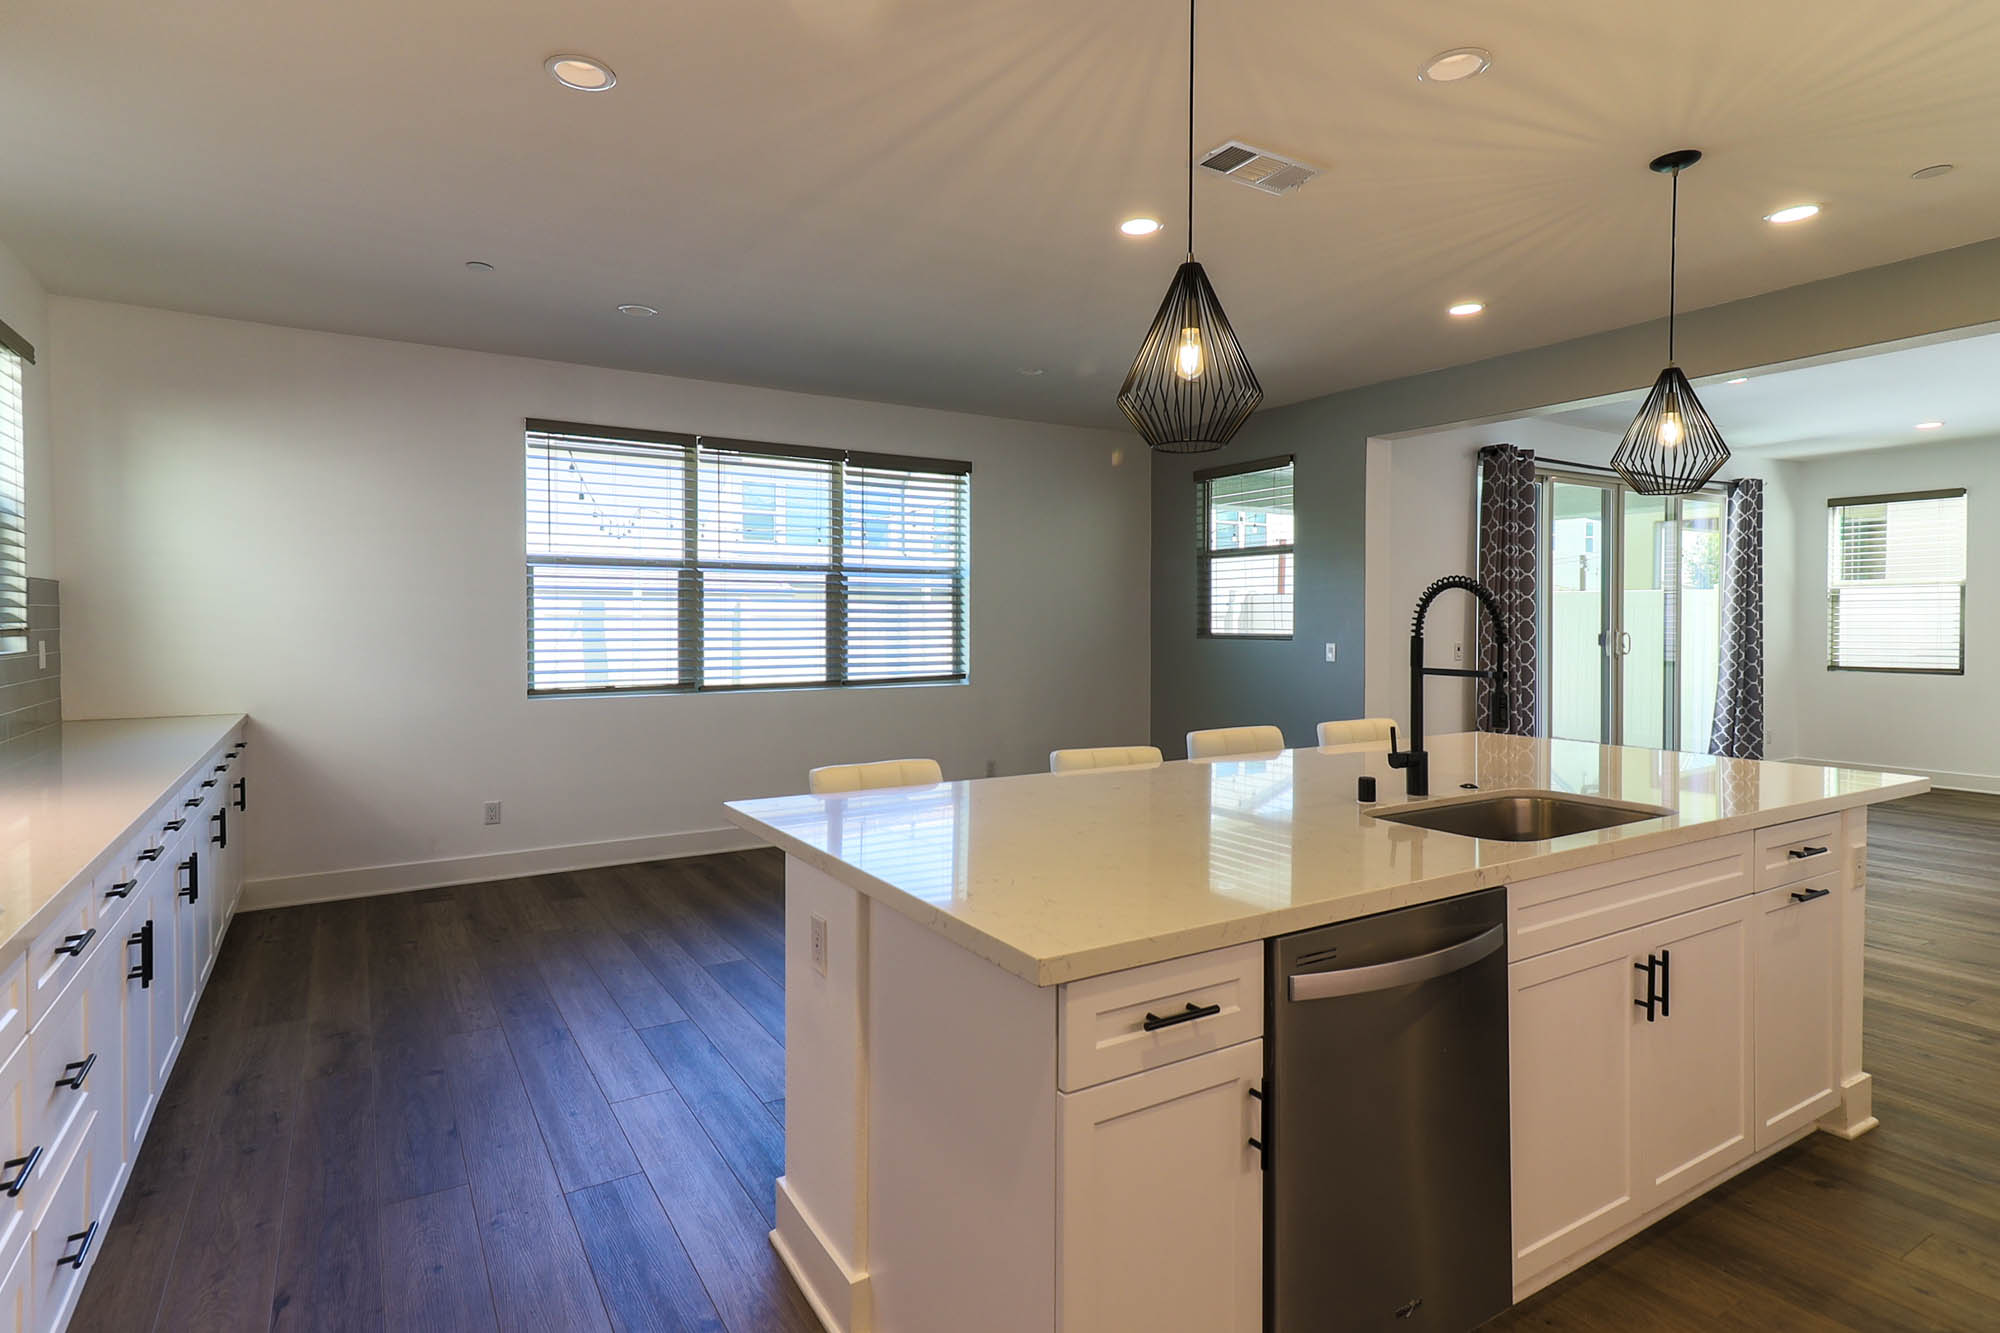 Kitchen island and dining area photo